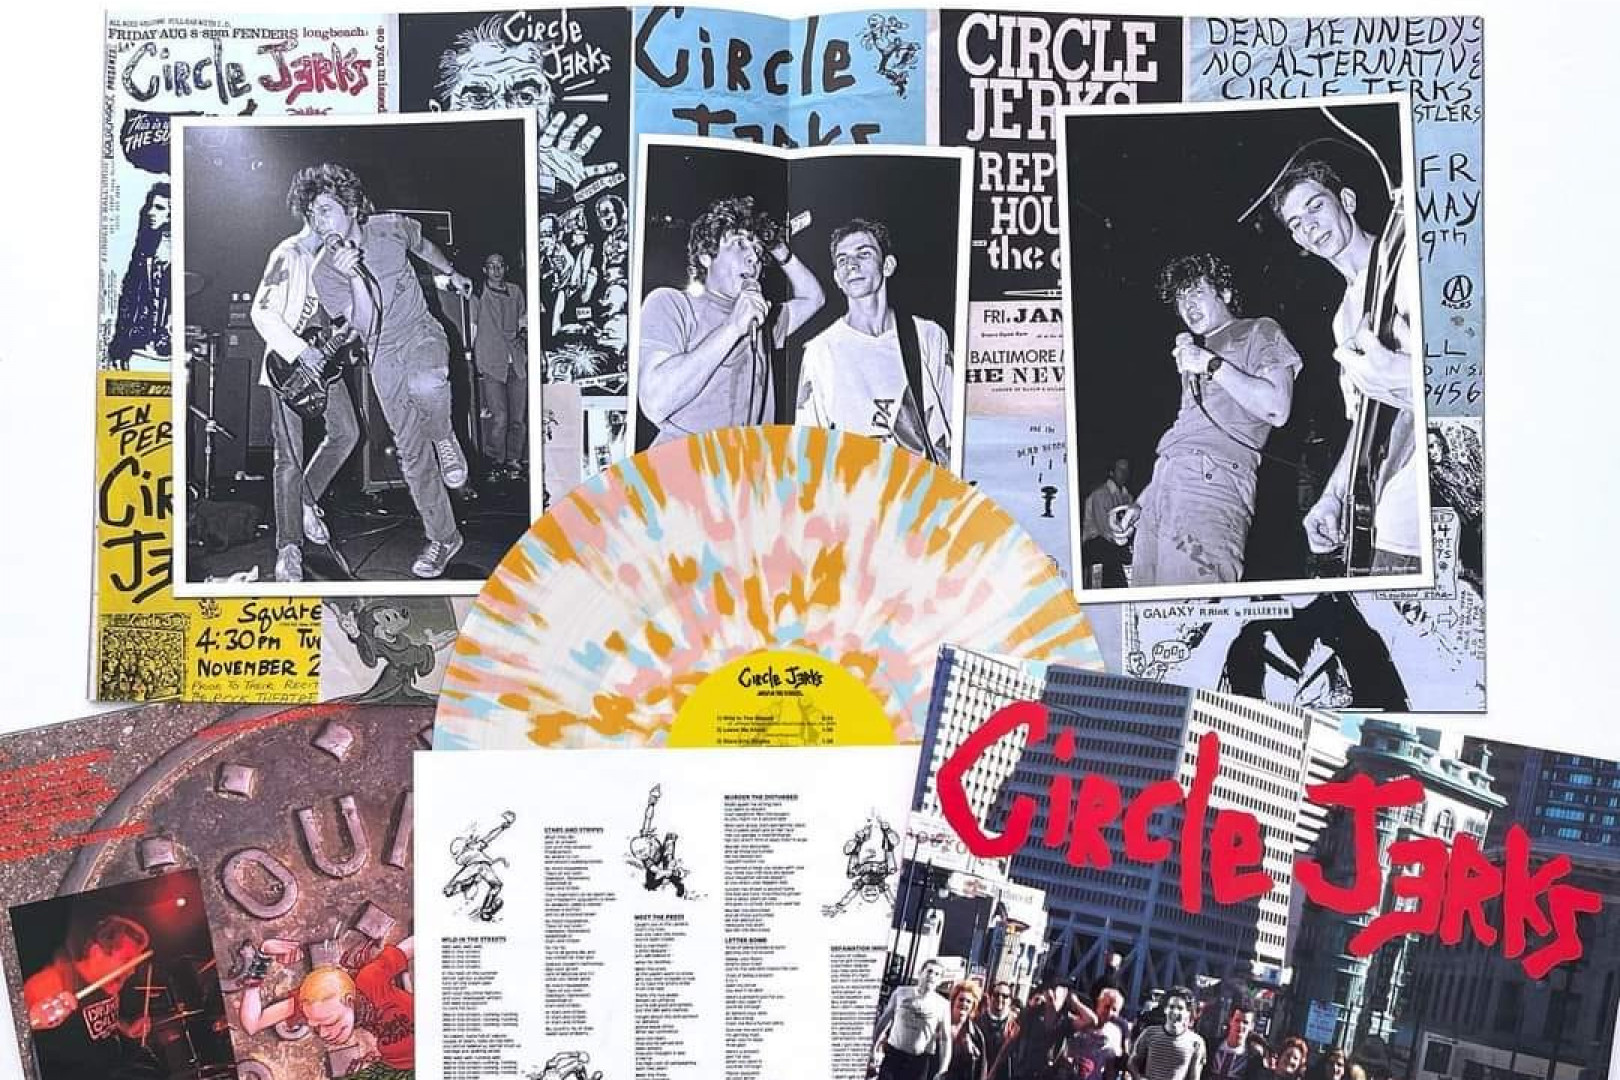 Circle Jerks to re-issue 'Wild in the Streets'